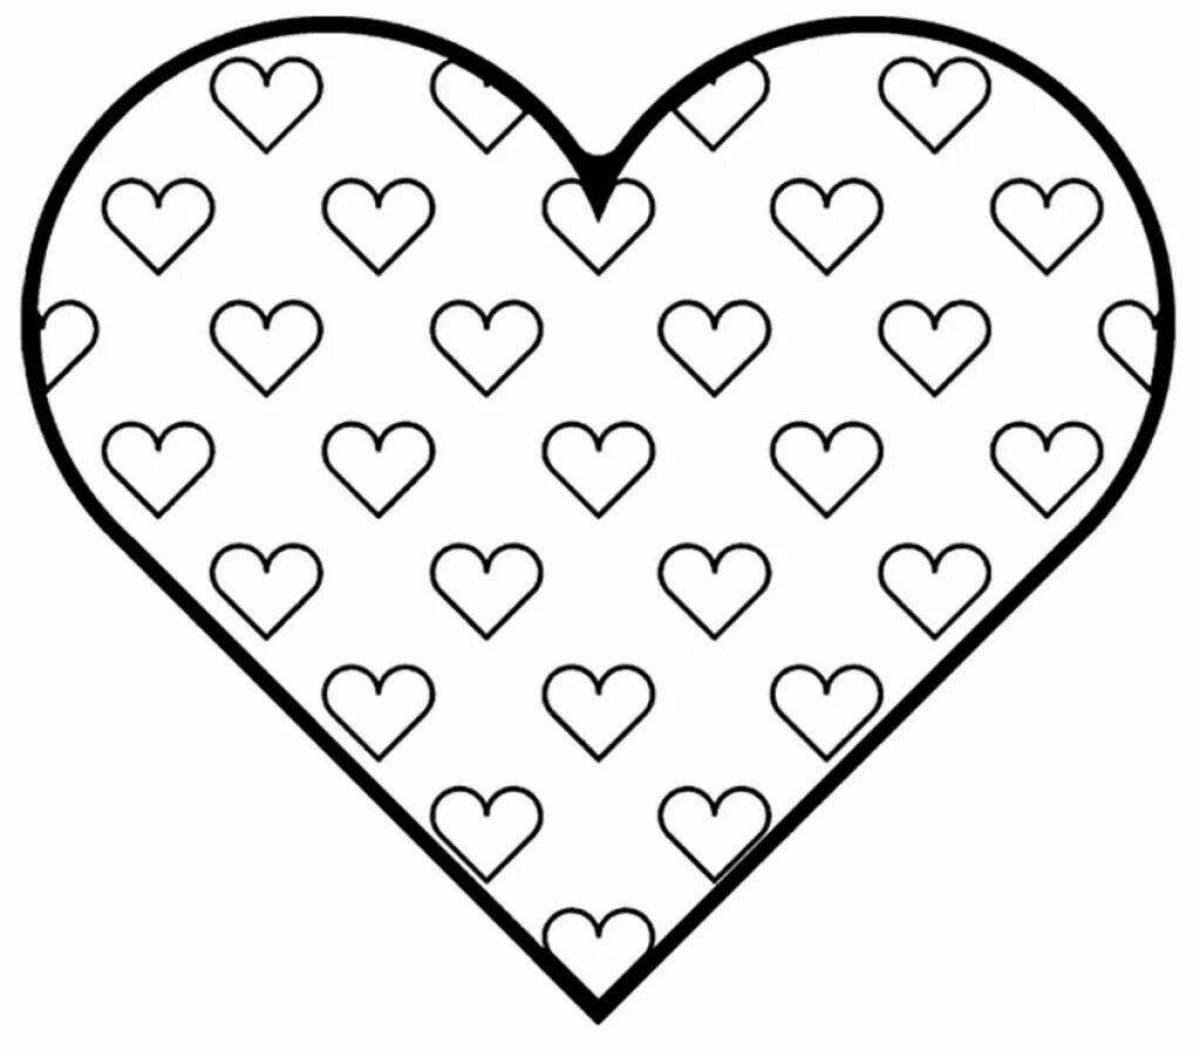 Cute rainbow heart coloring page